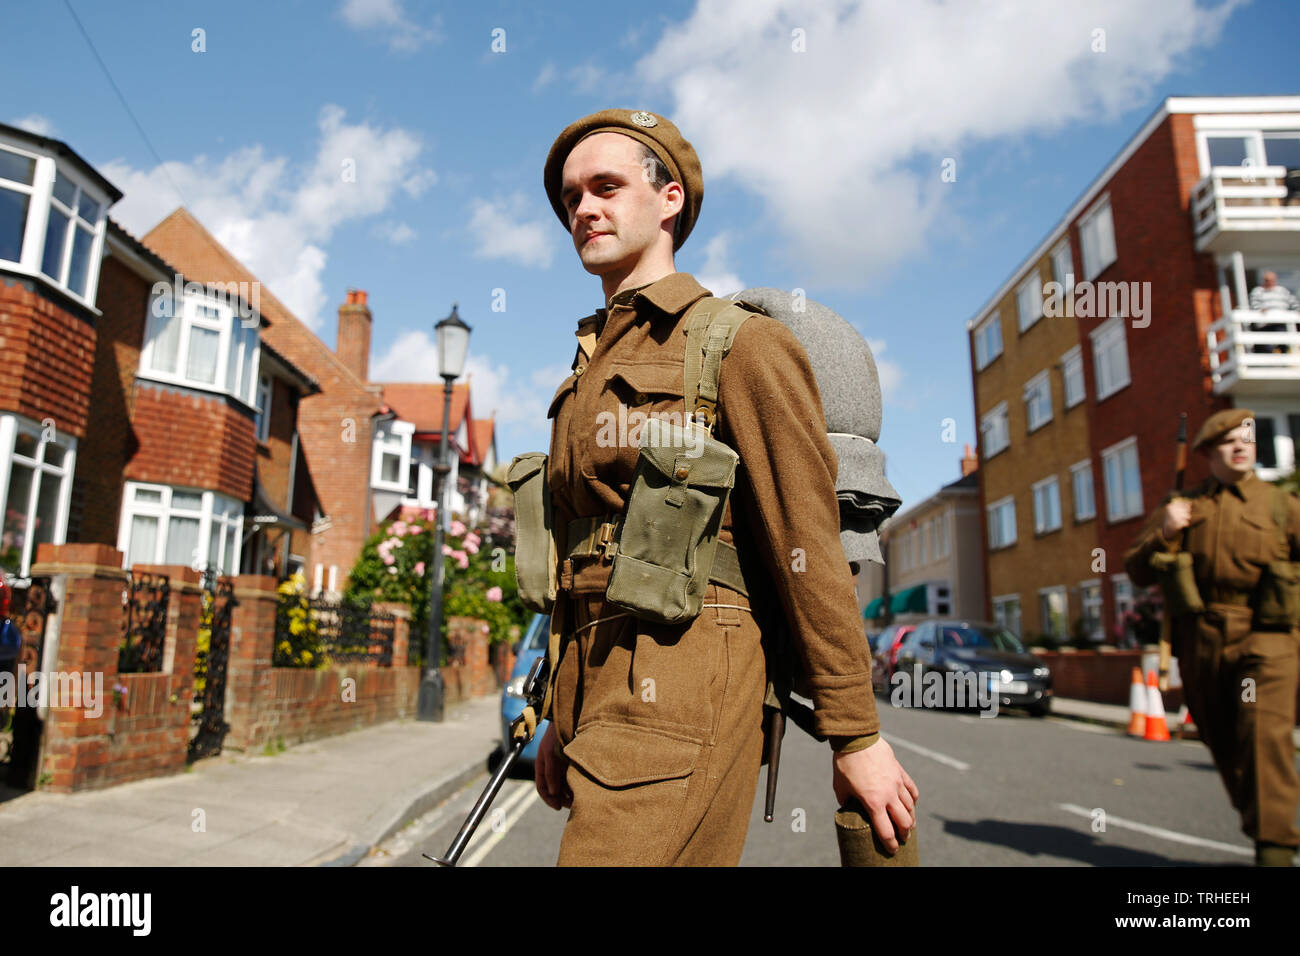 Portsmouth, UK. 6th June, 2019. World War II re-enactors walk the original route of the d-day soldiers took through Portsmouth to the landing craft, in Southsea, Portmsouth Thursday June 6, 2019. D-day commemorations marking the 75th anniversary of the d-day landings Photograph : Credit: Luke MacGregor/Alamy Live News Stock Photo